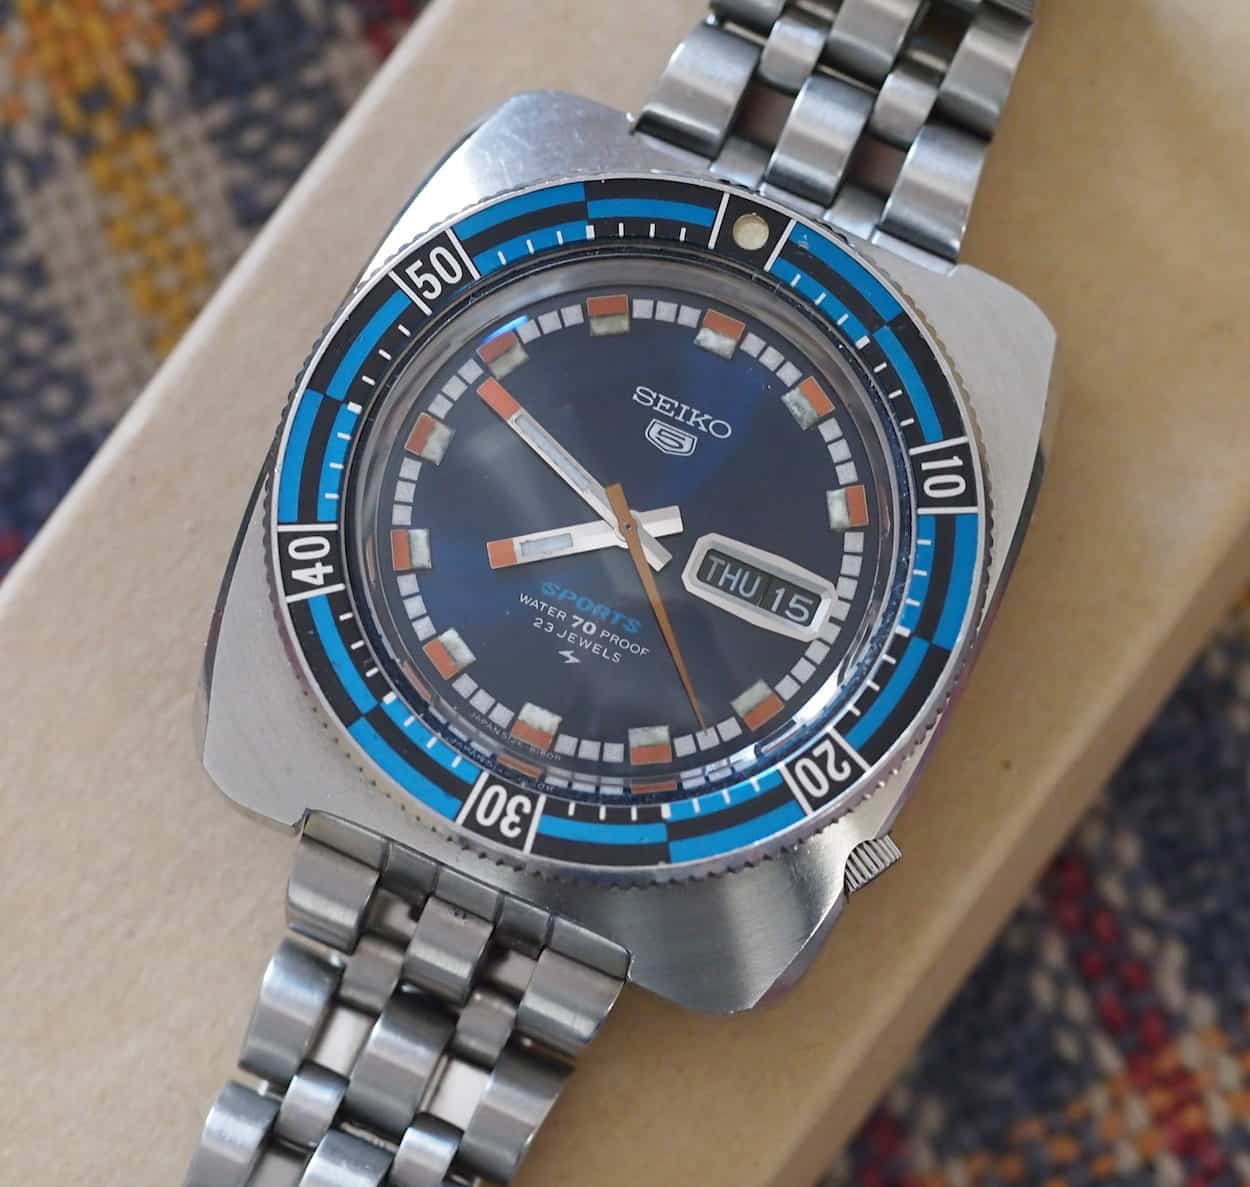 WTB: Seiko 5126 rally / reissue SBSS015 | The Watch Site